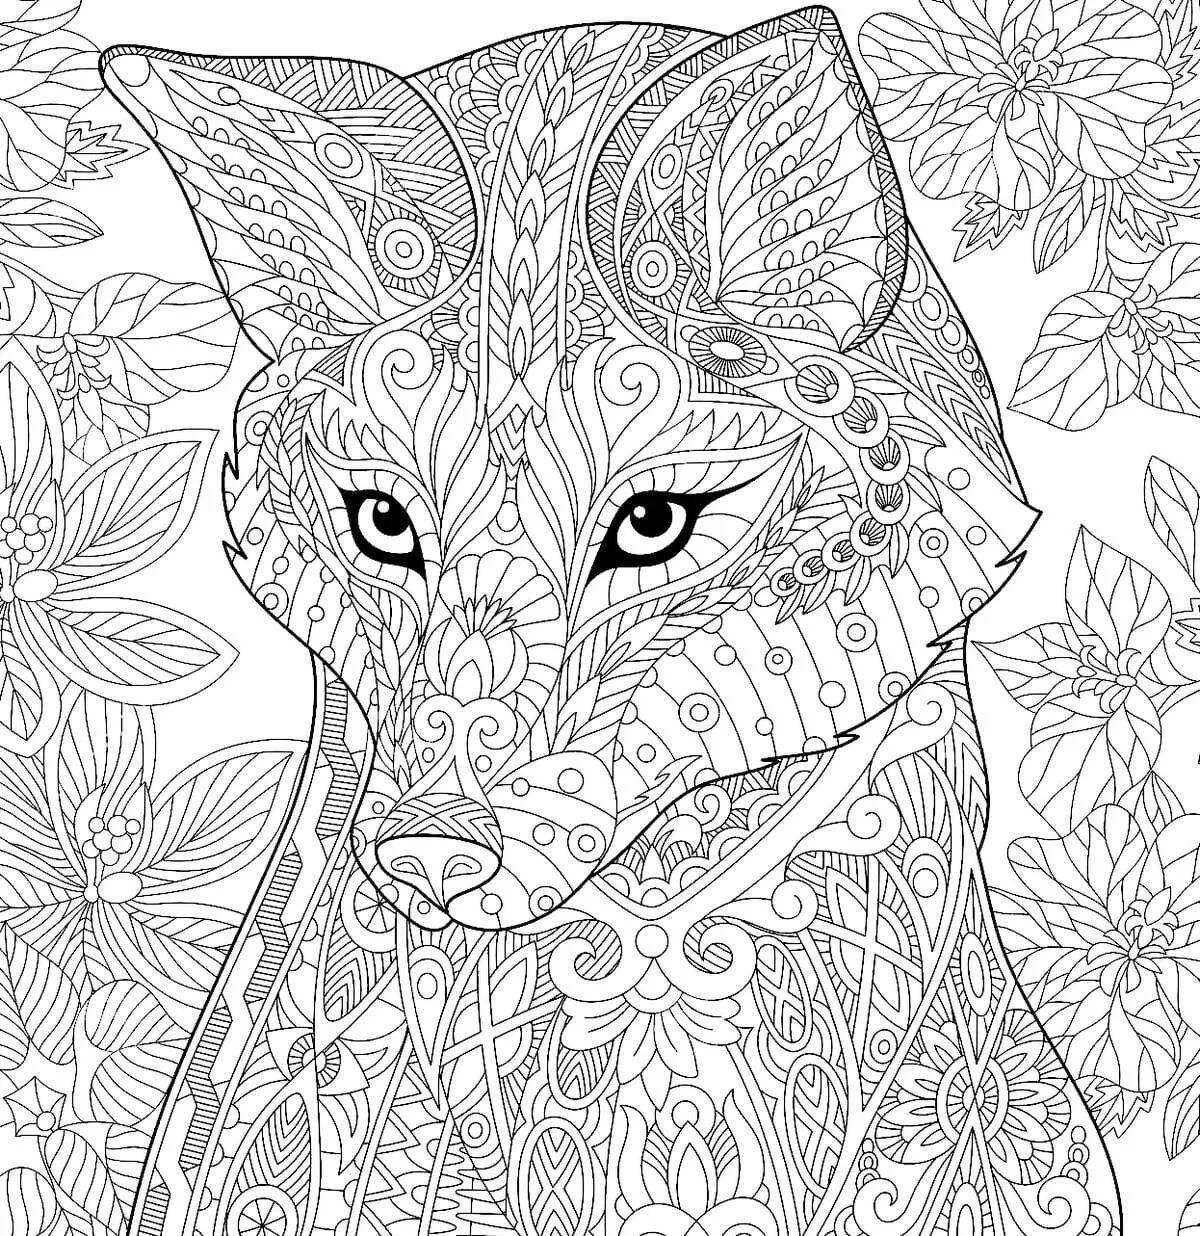 Fancy fox coloring book for adults